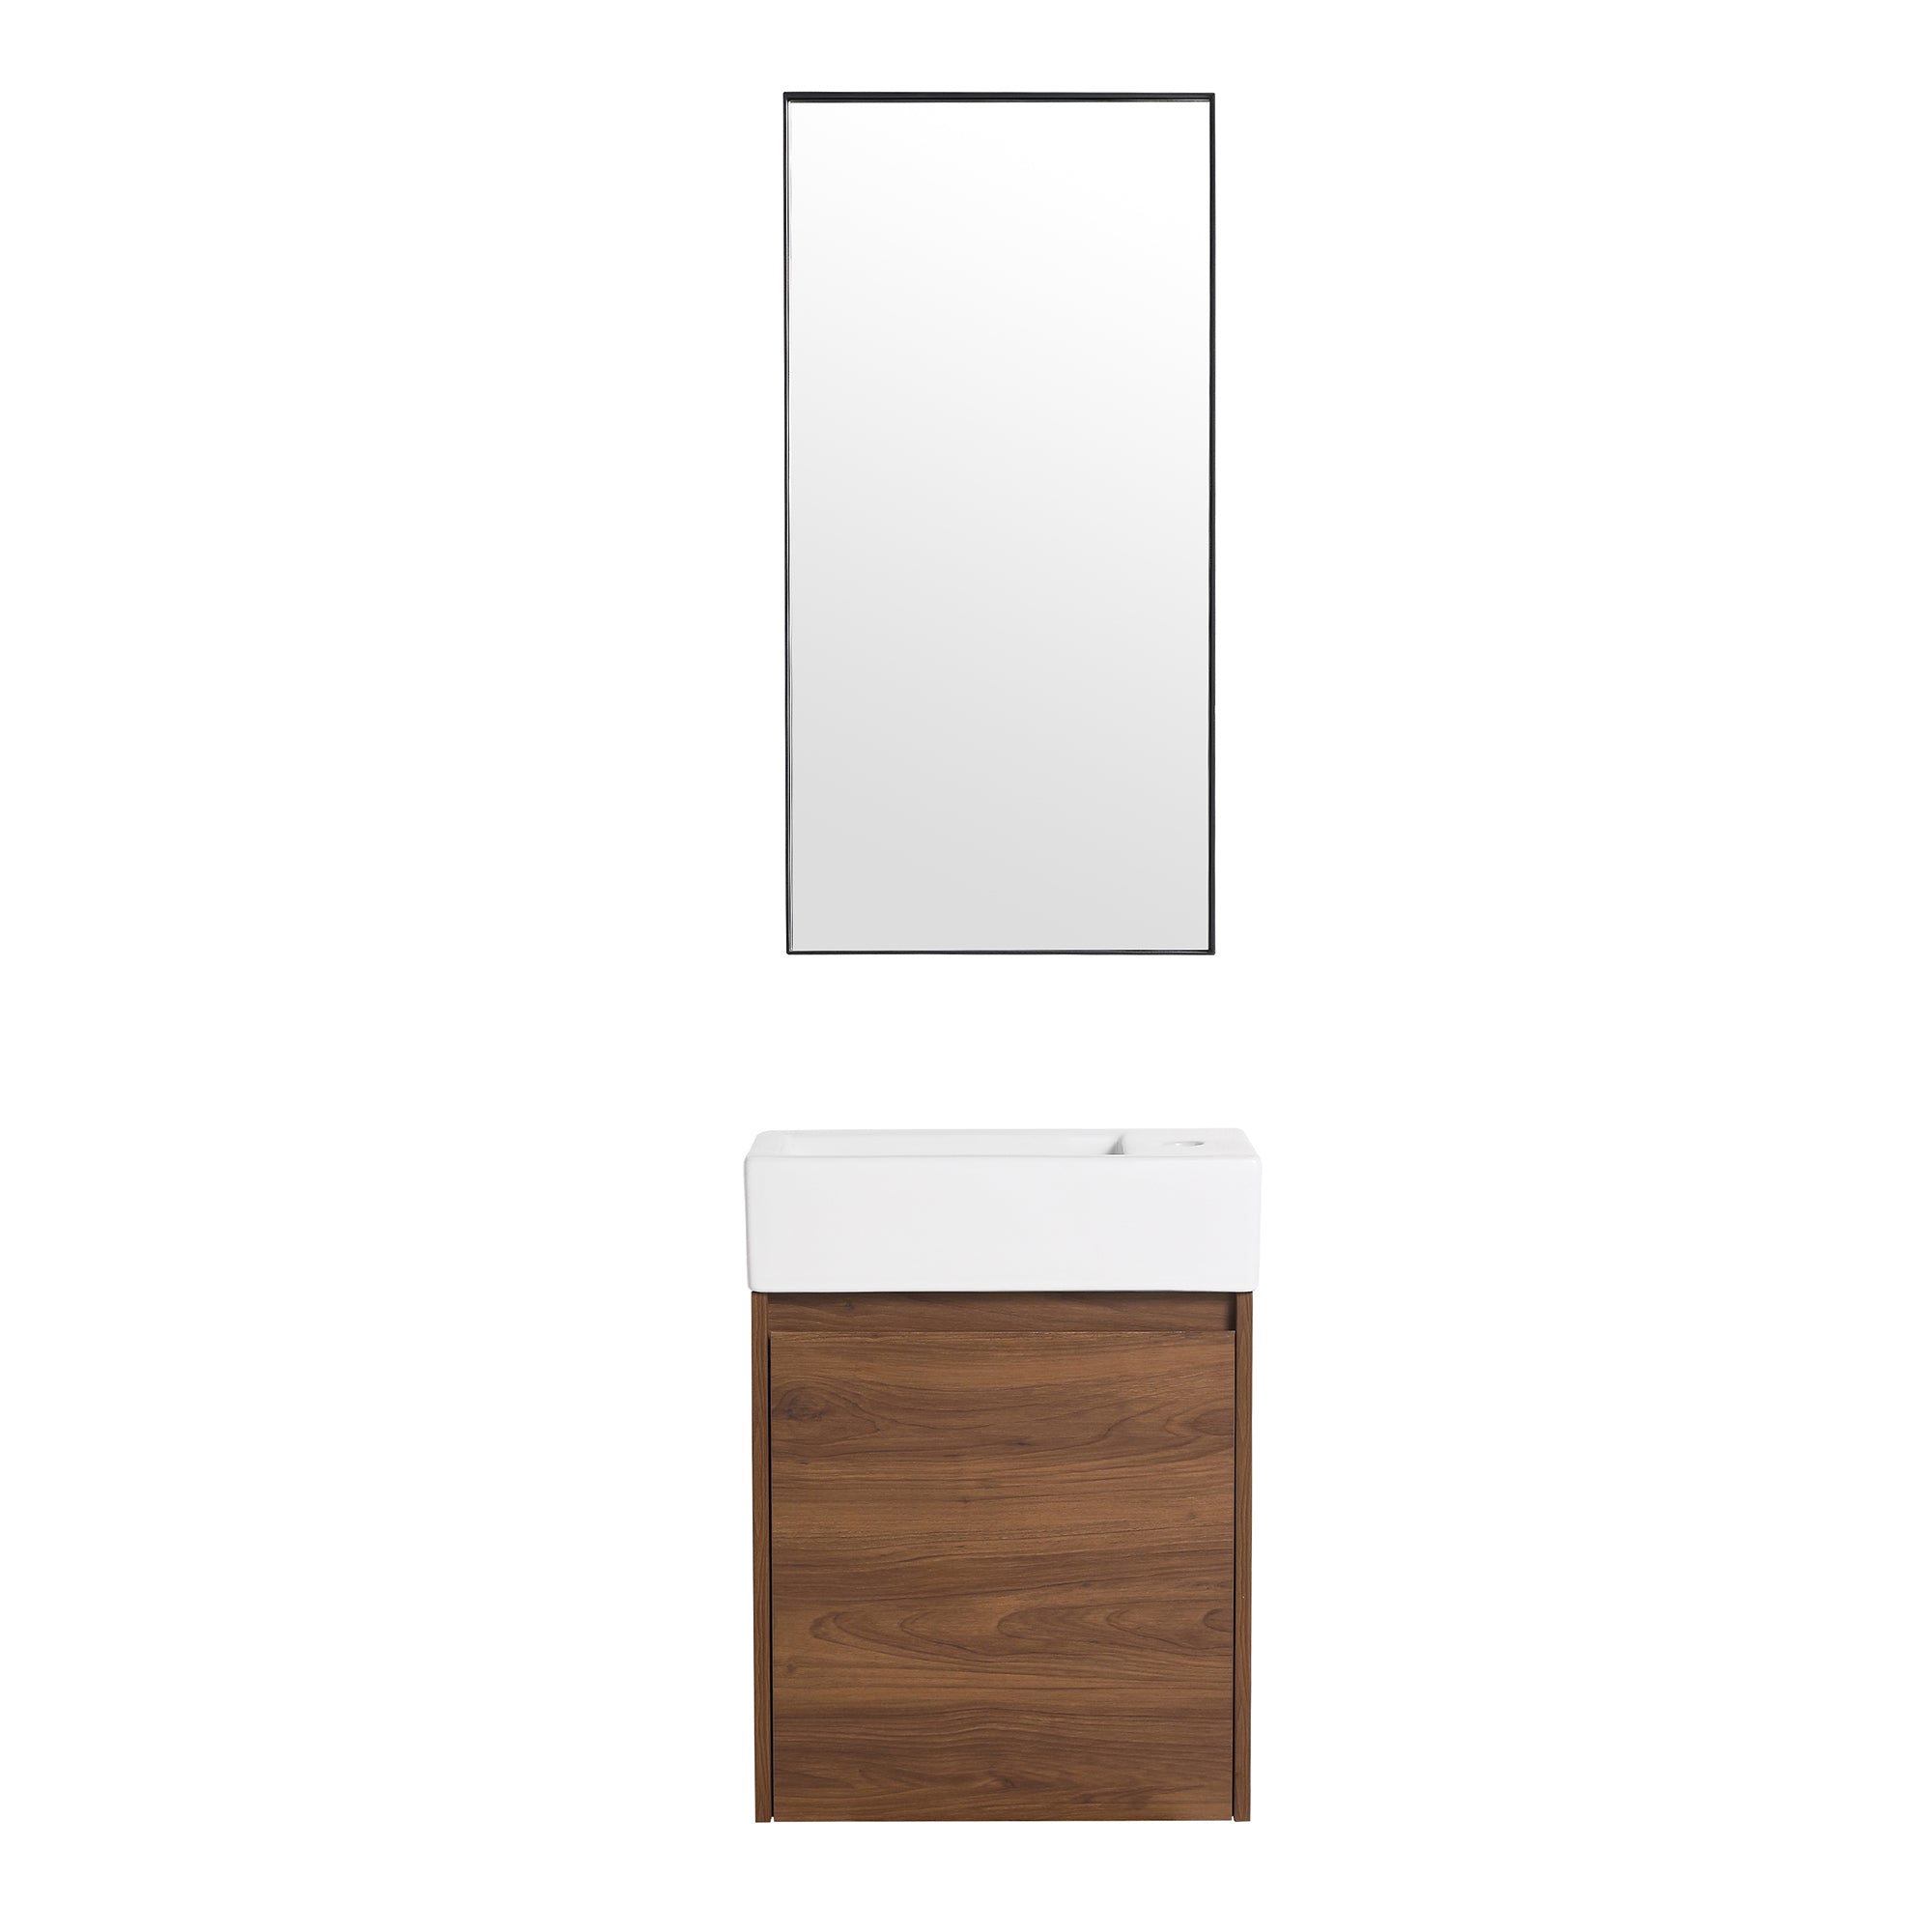 18 in. Plywood Wall Mounted Bathroom Vanity Set in Brown Ebony with Integrated Ceramic Sink